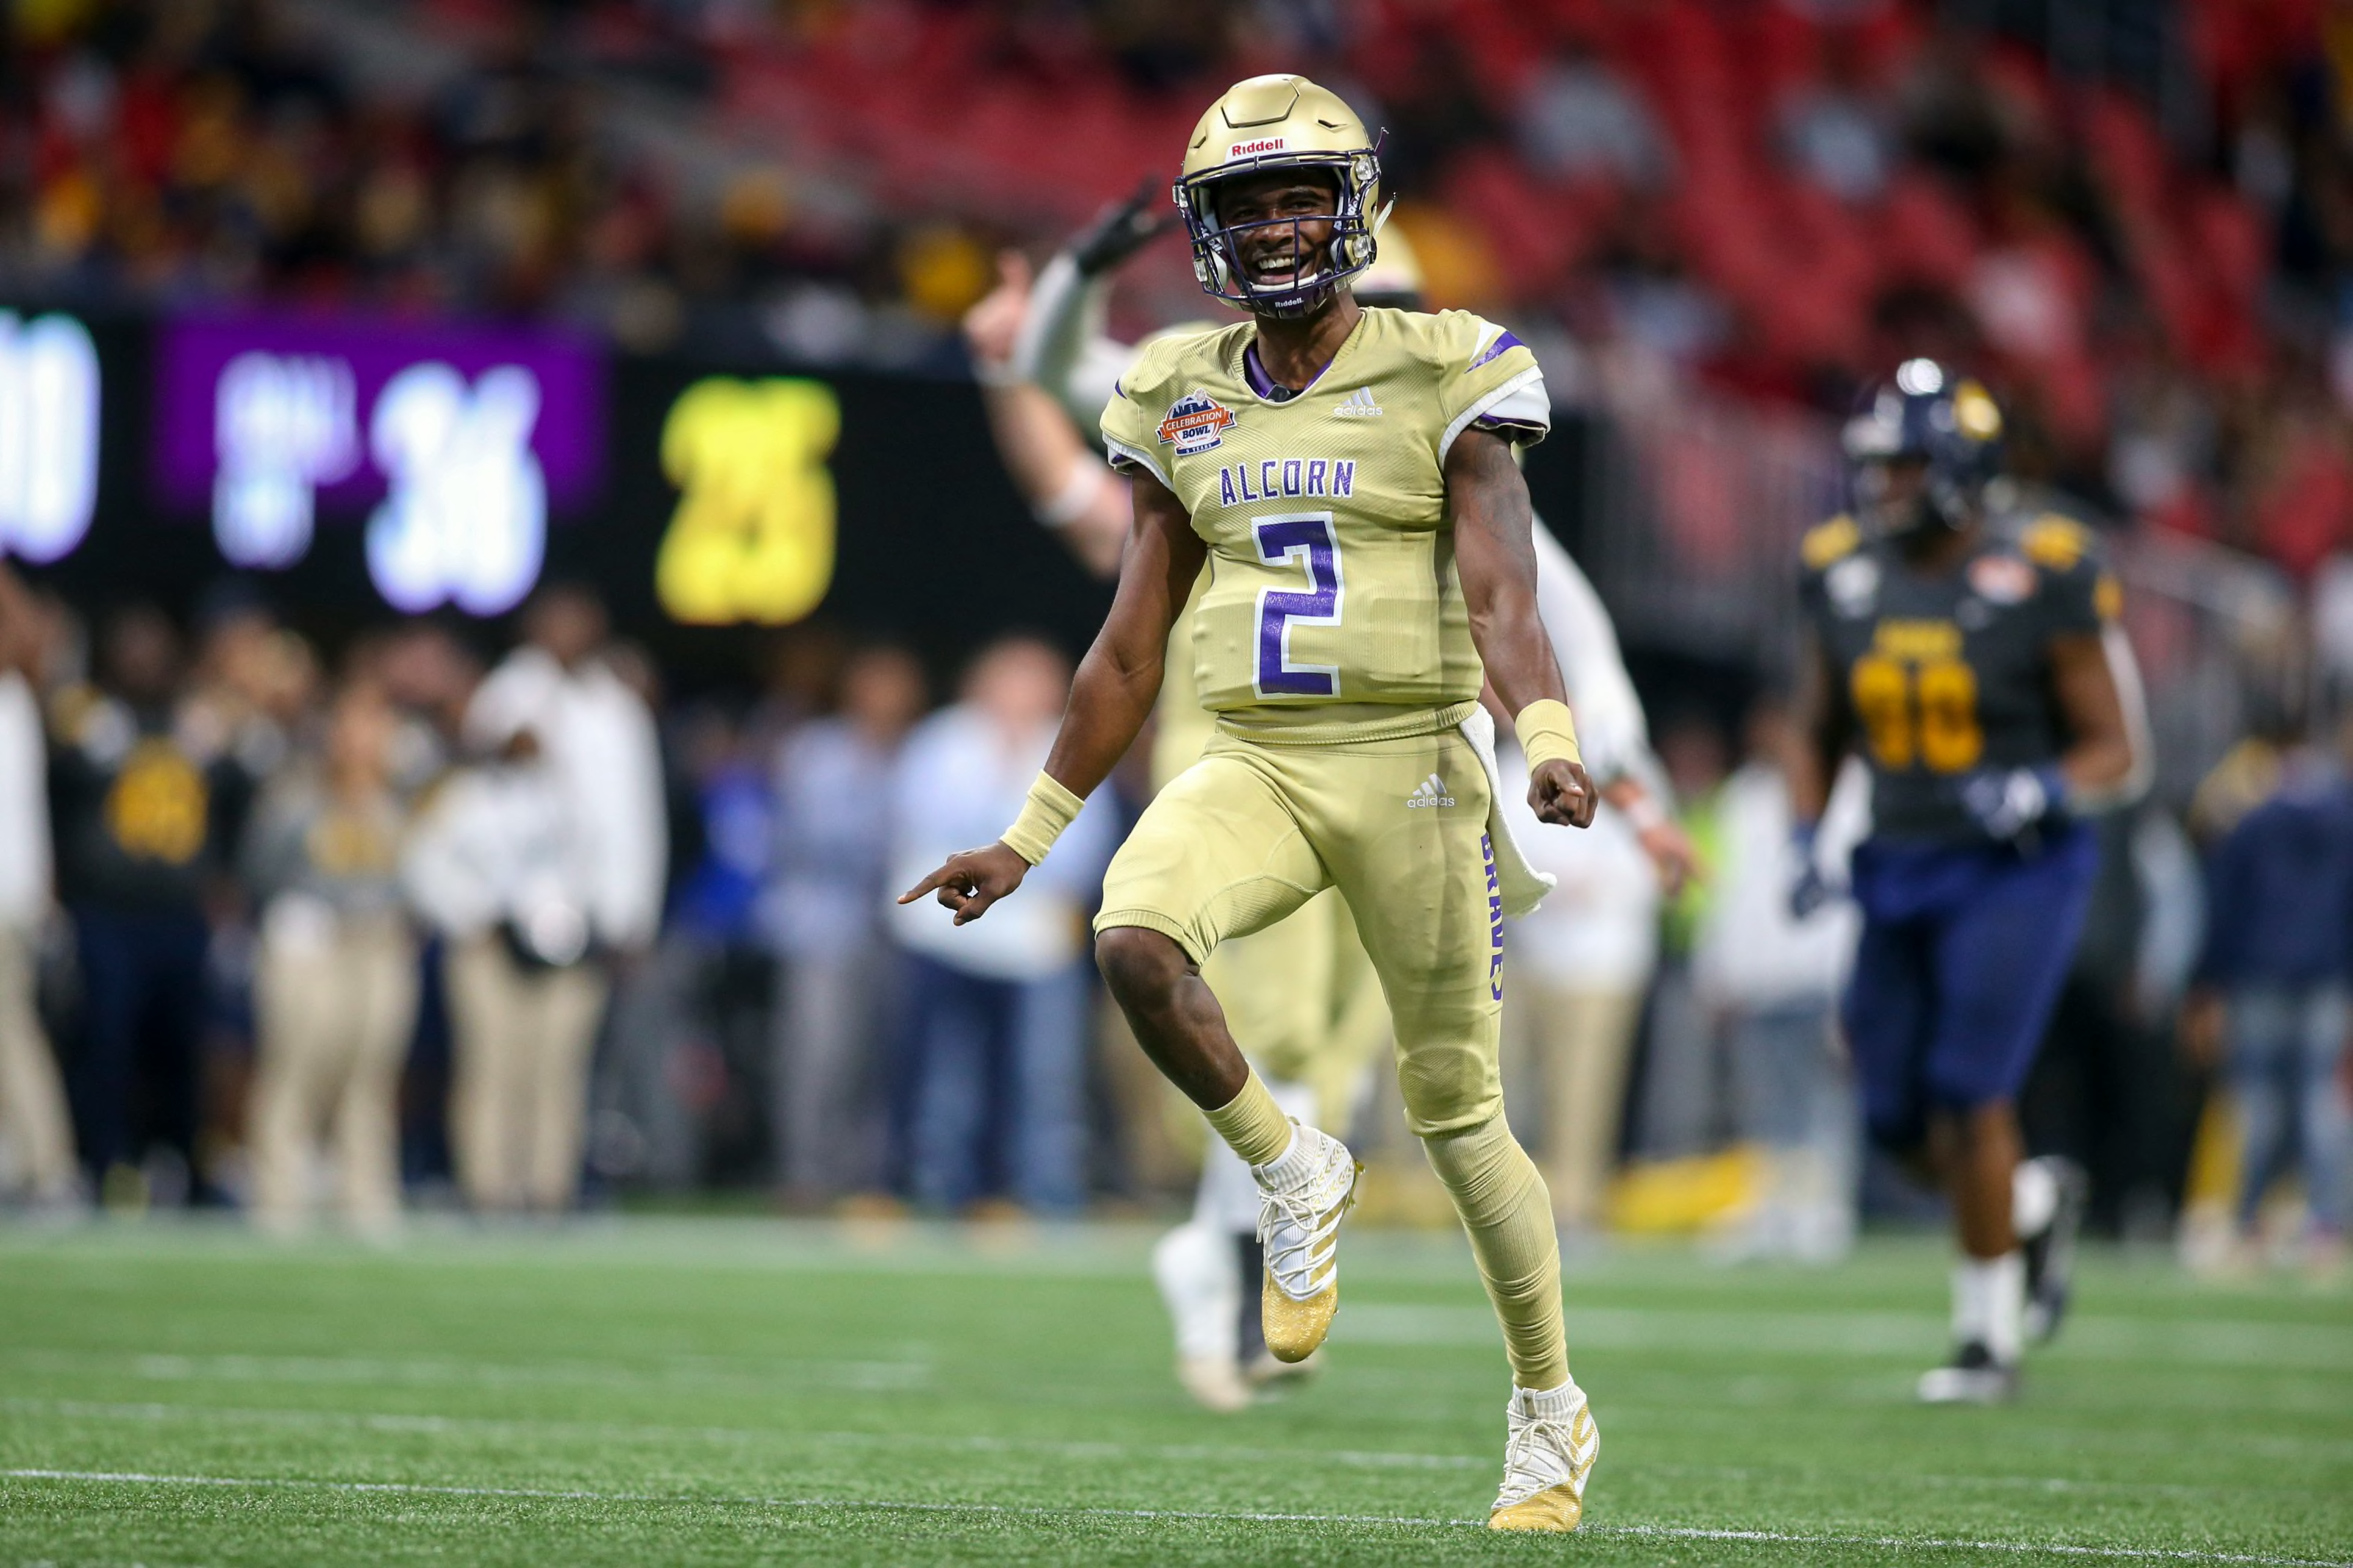 HBCU Football Will Alcorn State reclaim SWAC throne in 2021? Page 2